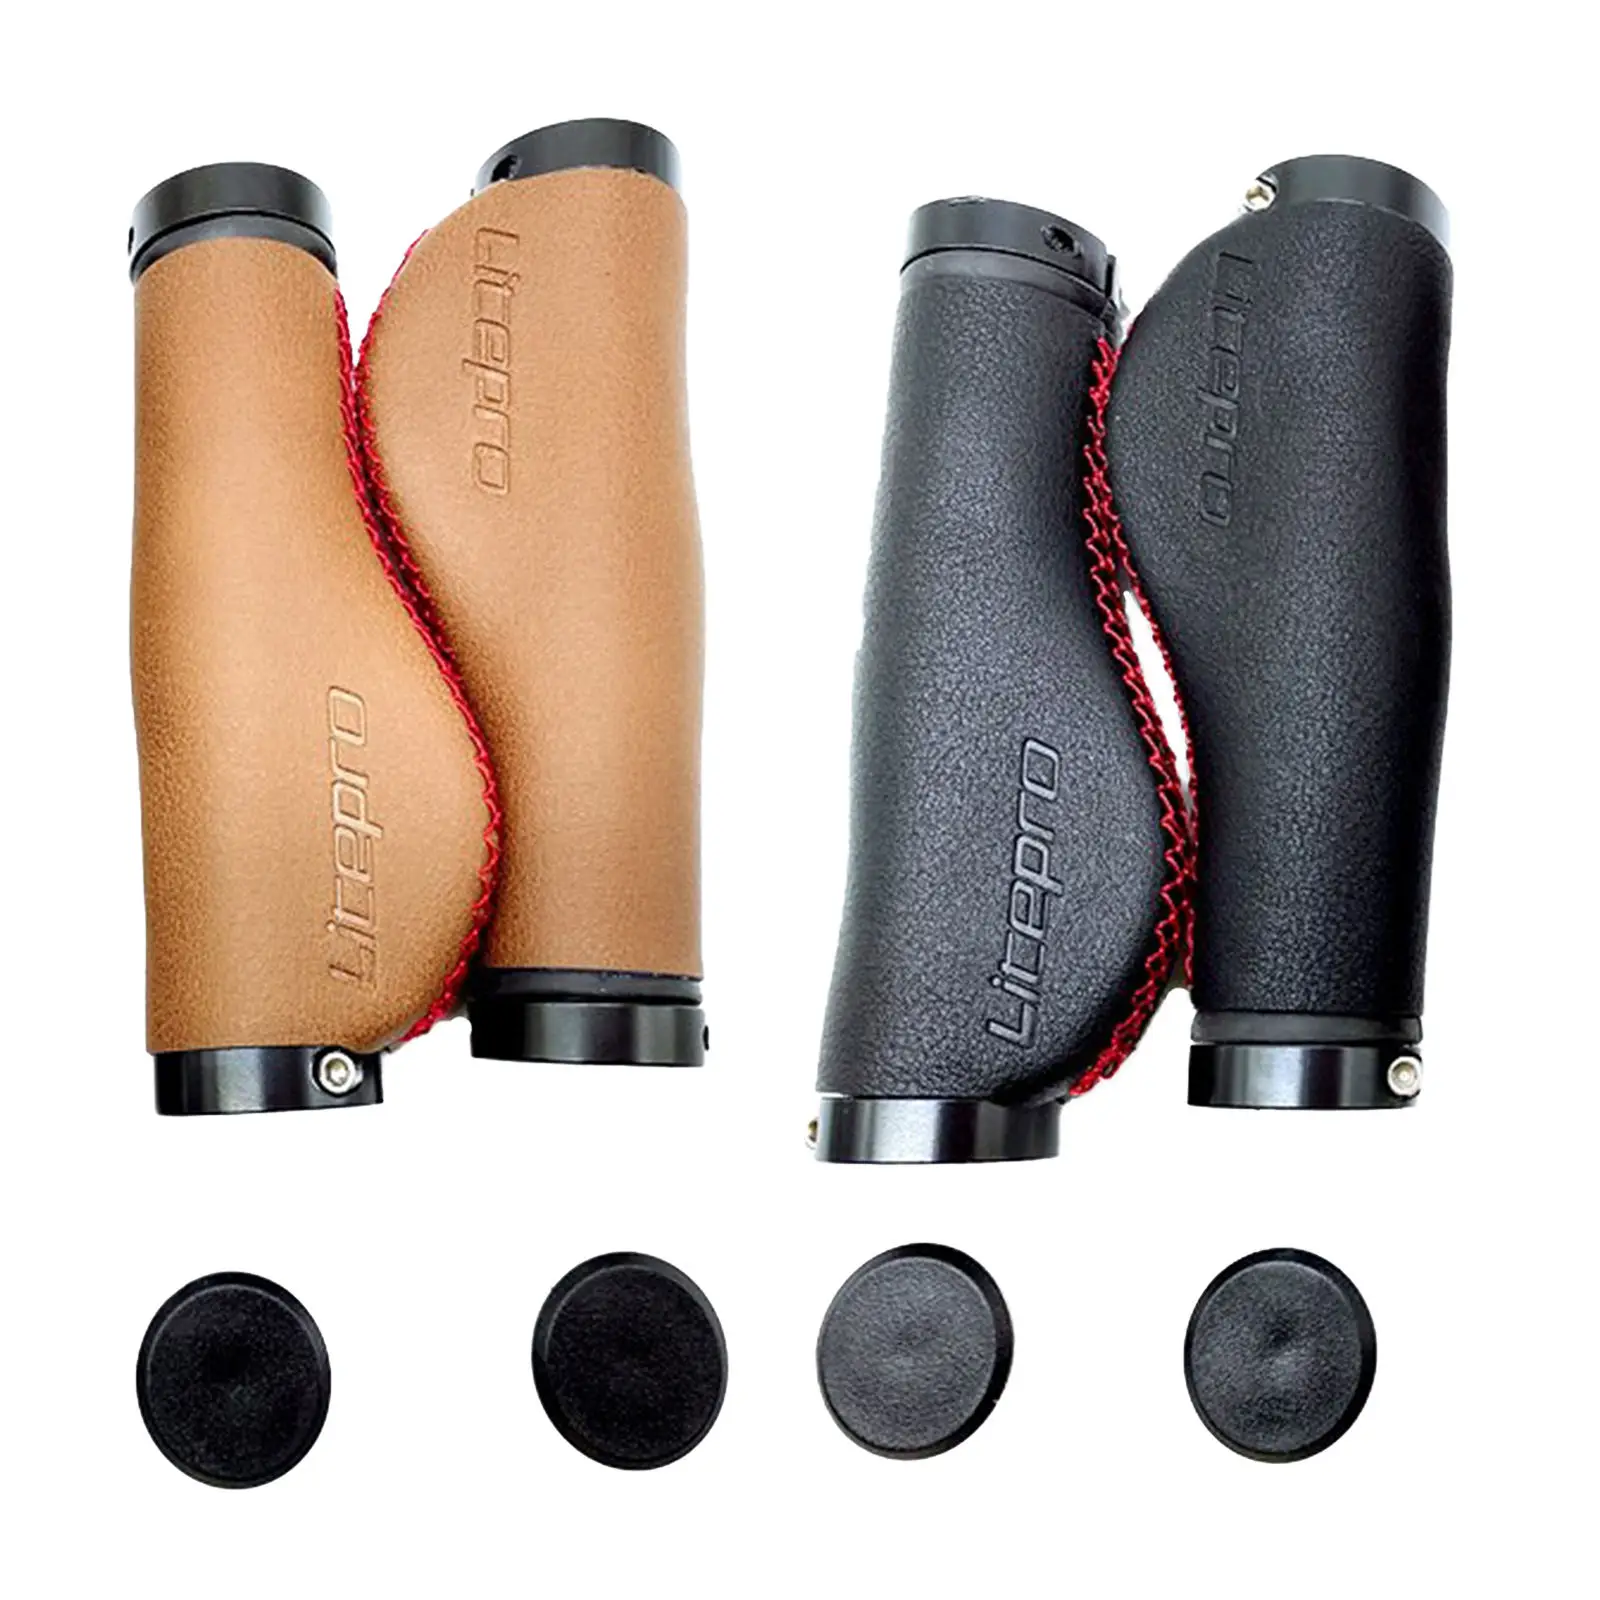 Bicycle Grips Non Slip Vintage Style Comfort Artificial Leather Handlebar Grips Scooter Road Bike Bike Part Cycling MTB